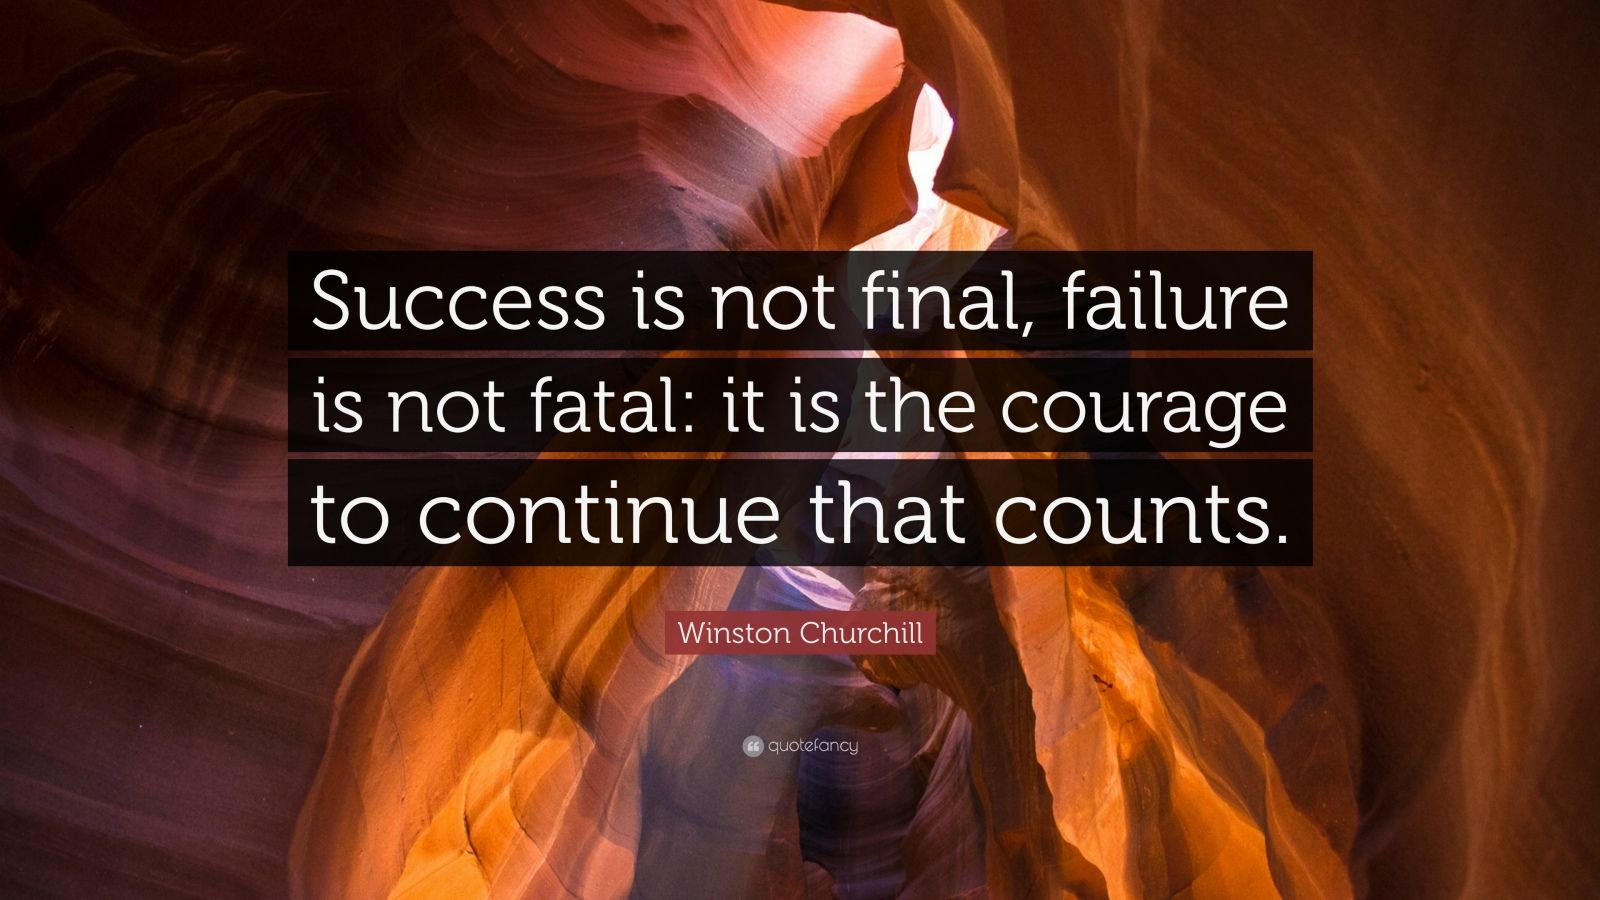 Winston Churchill Quote: “Success is not final, failure is not fatal ...